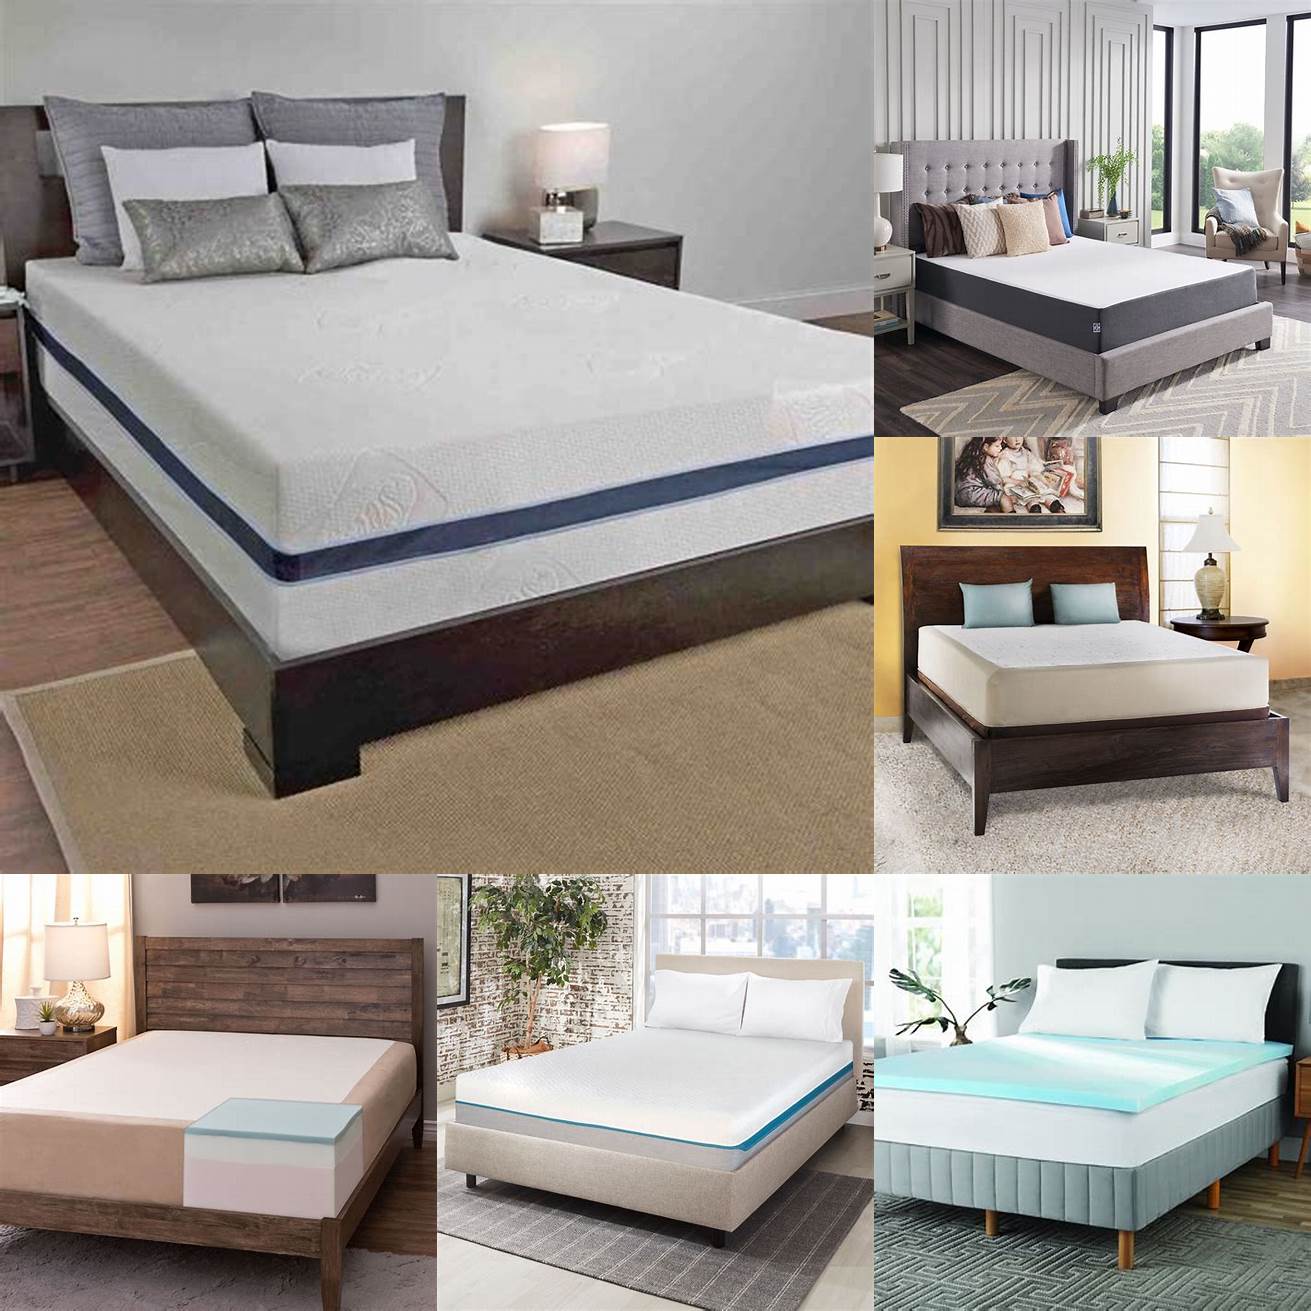 Customization Memory foam beds come in a variety of firmness levels so you can choose one that works best for your sleeping preferences